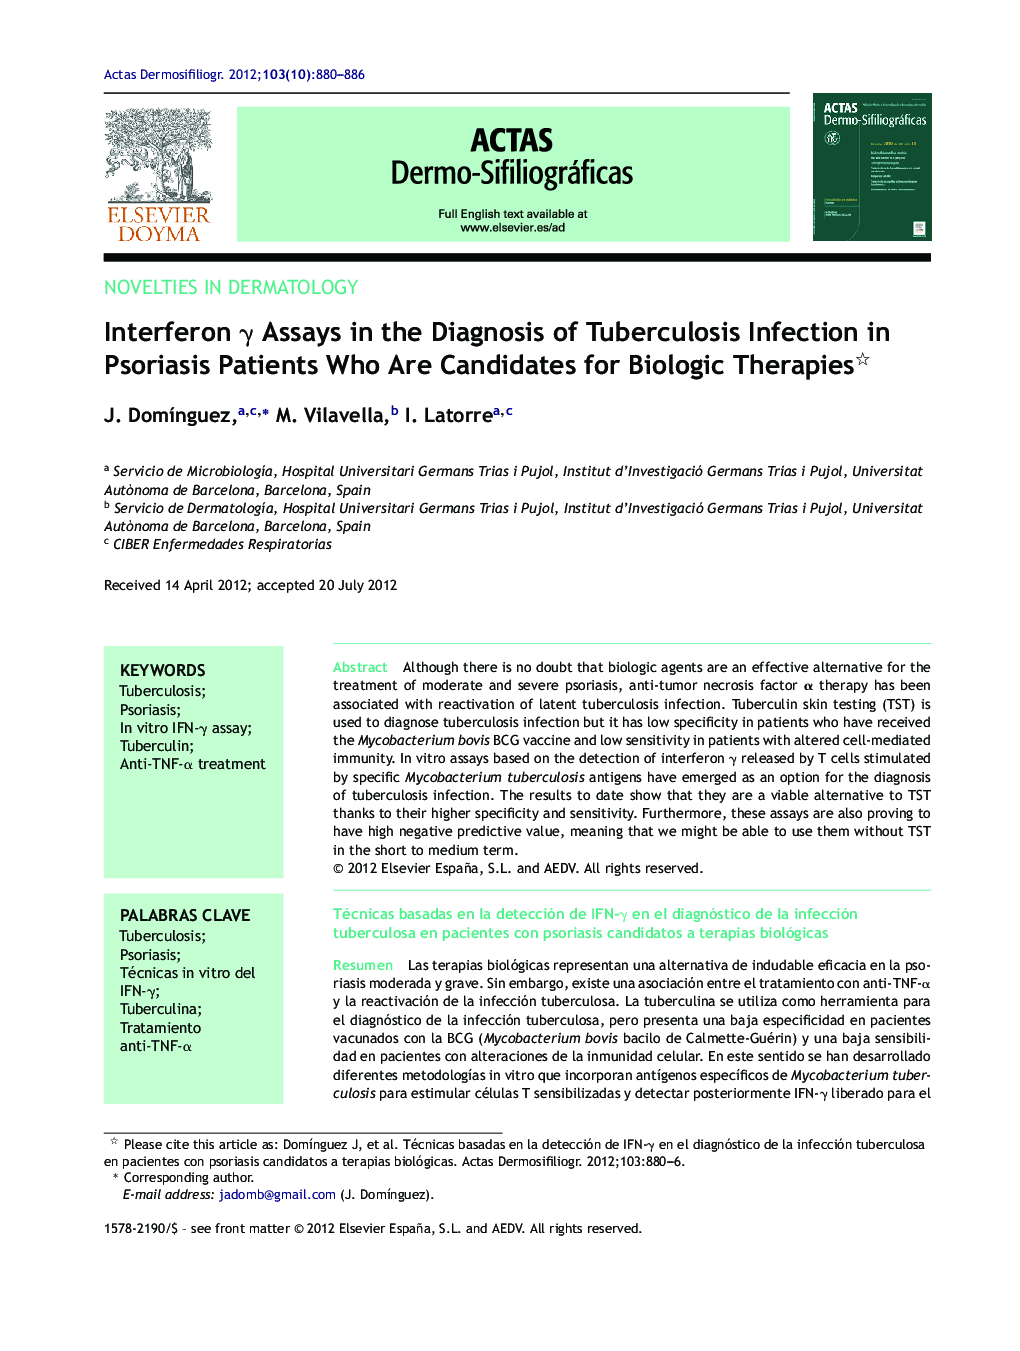 Interferon γ Assays in the Diagnosis of Tuberculosis Infection in Psoriasis Patients Who Are Candidates for Biologic Therapies 